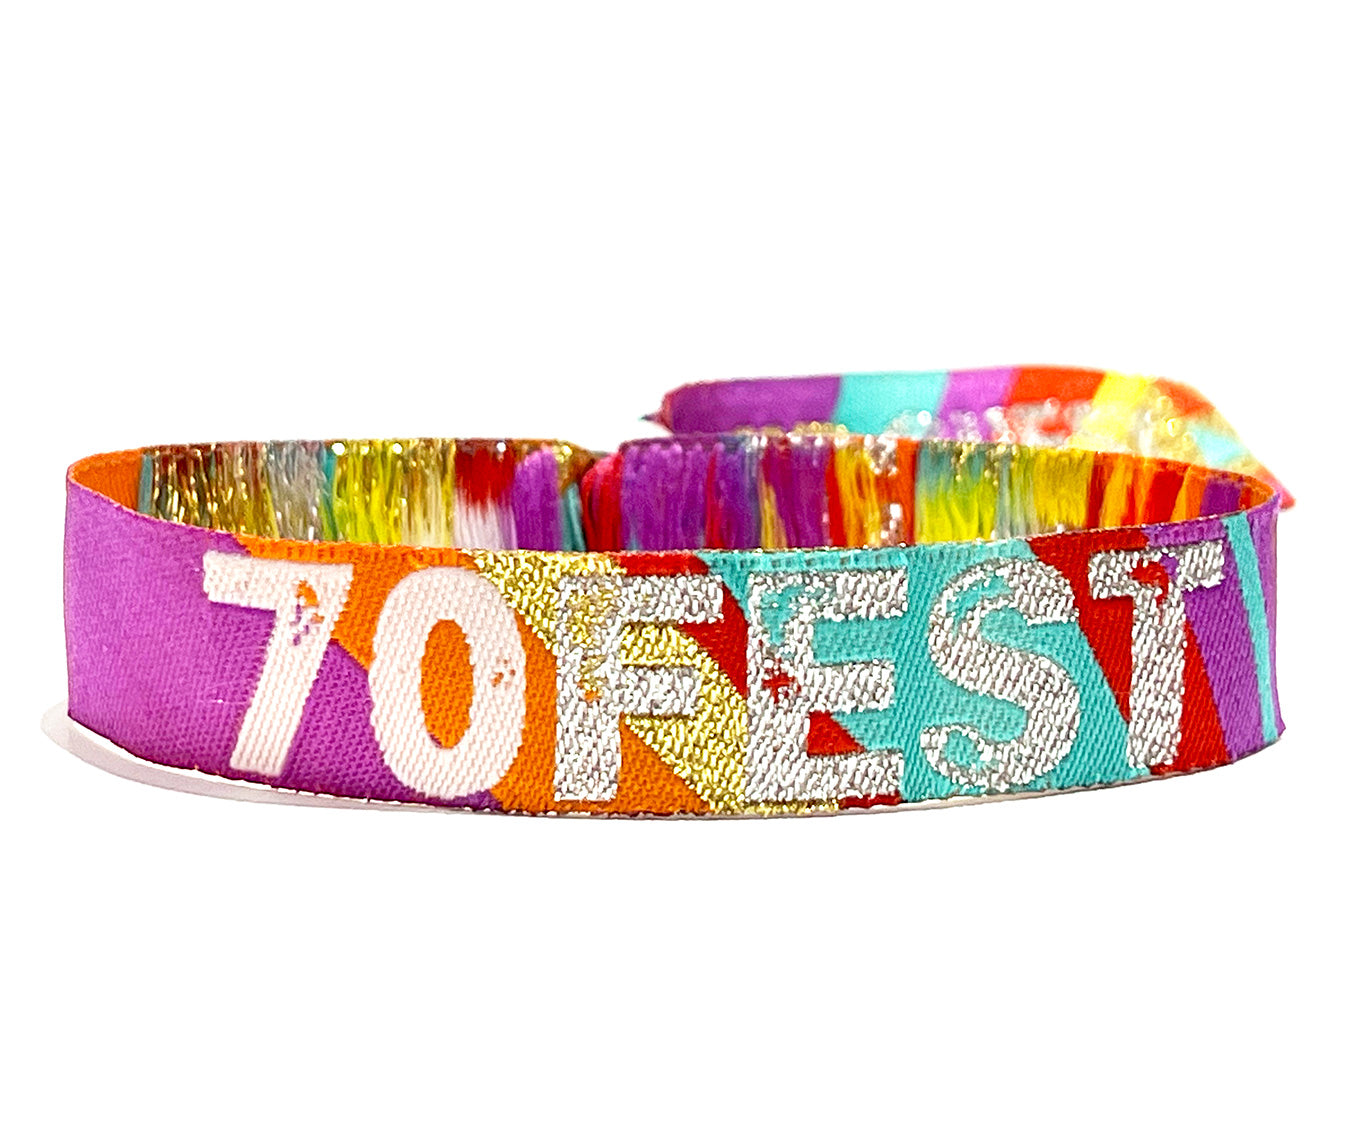 70 FEST birthday party festival wristbands 70th birthday favours